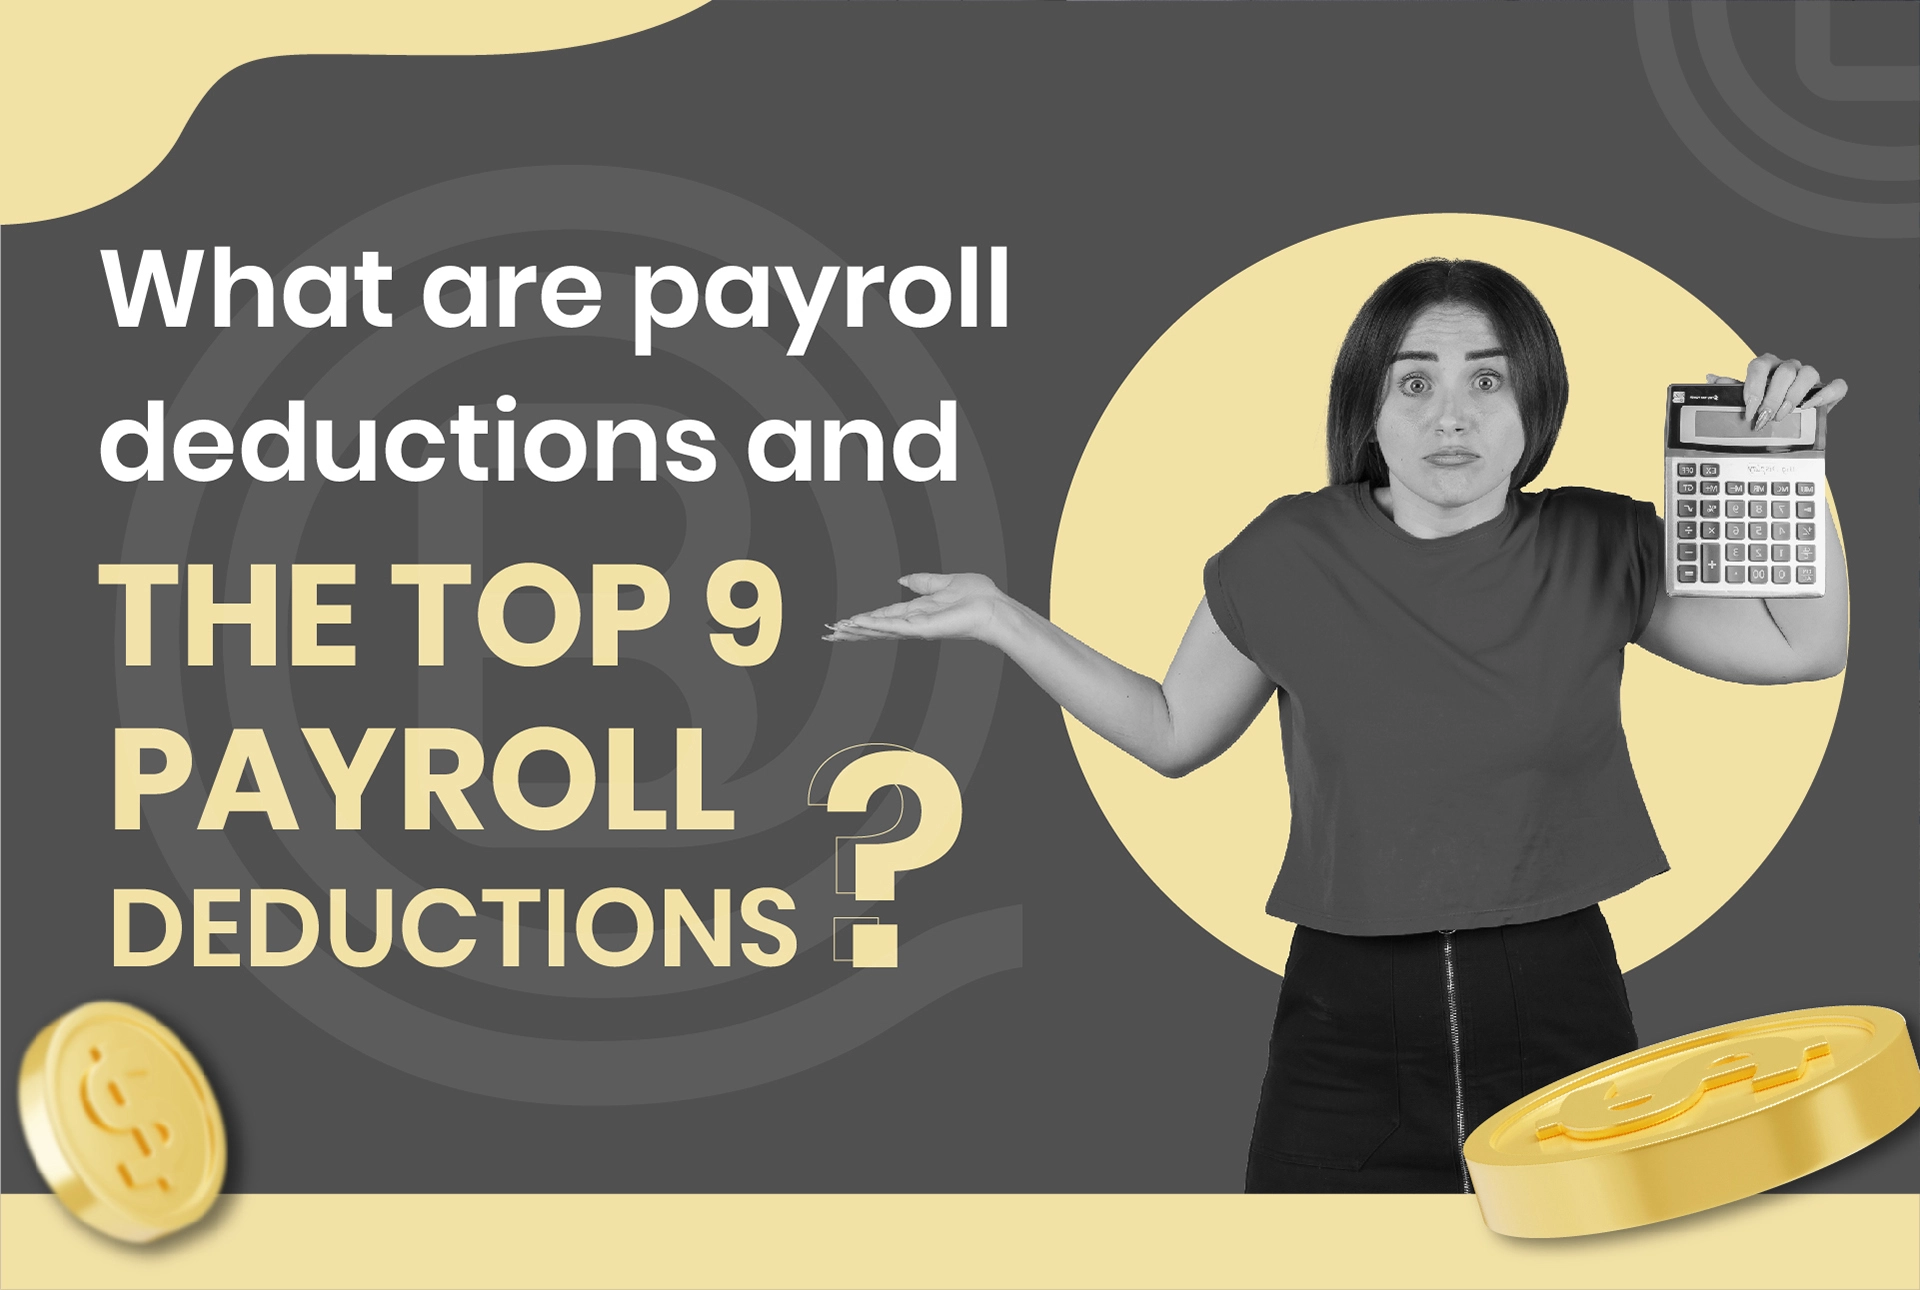 What are payroll deductions and the top 9 payroll deductions?